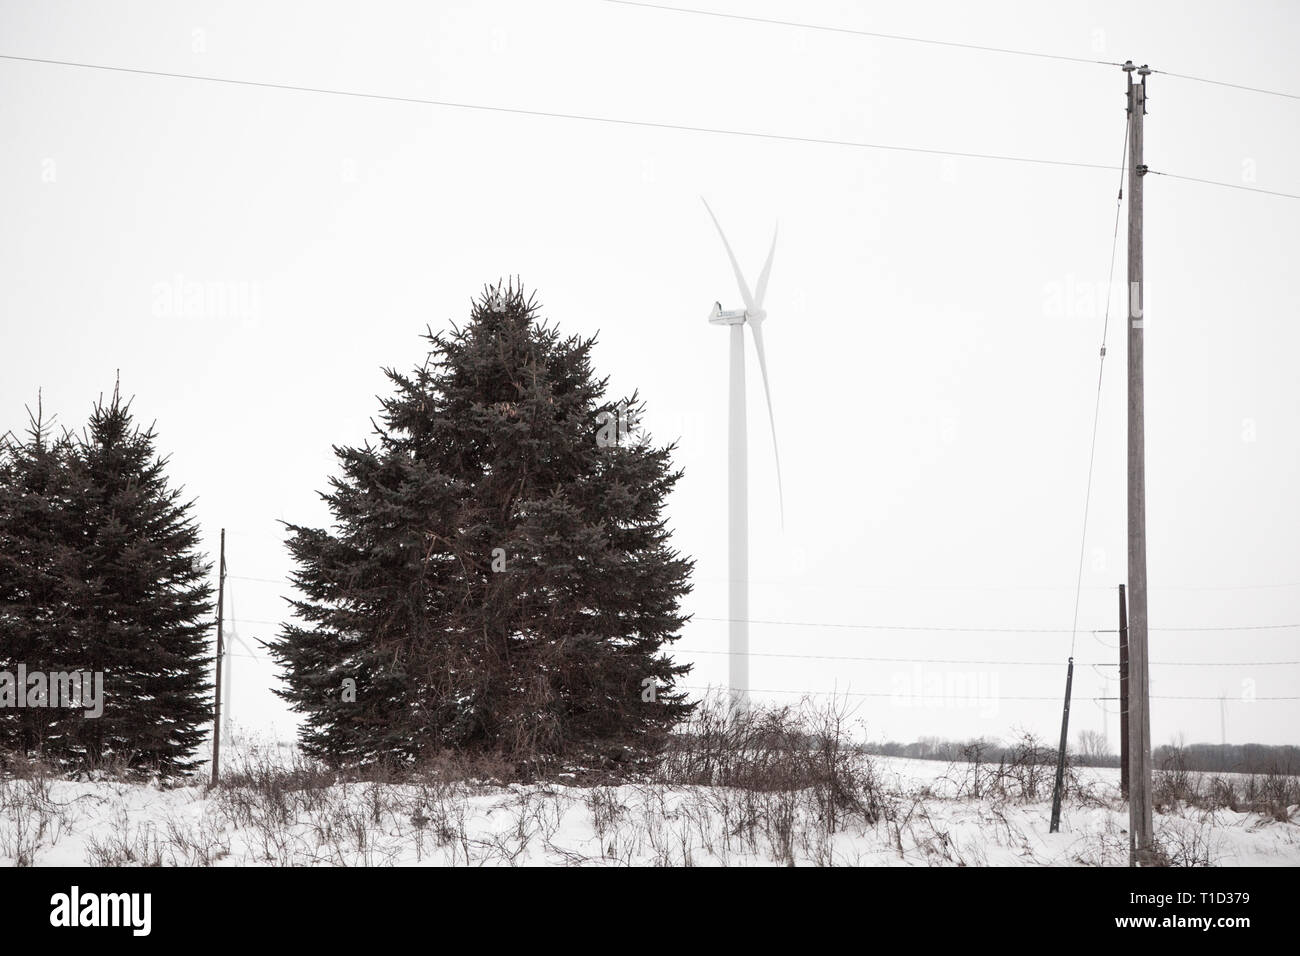 Wind Turbine, Power Lines and Evergreen Trees on Snowy Day Stock Photo